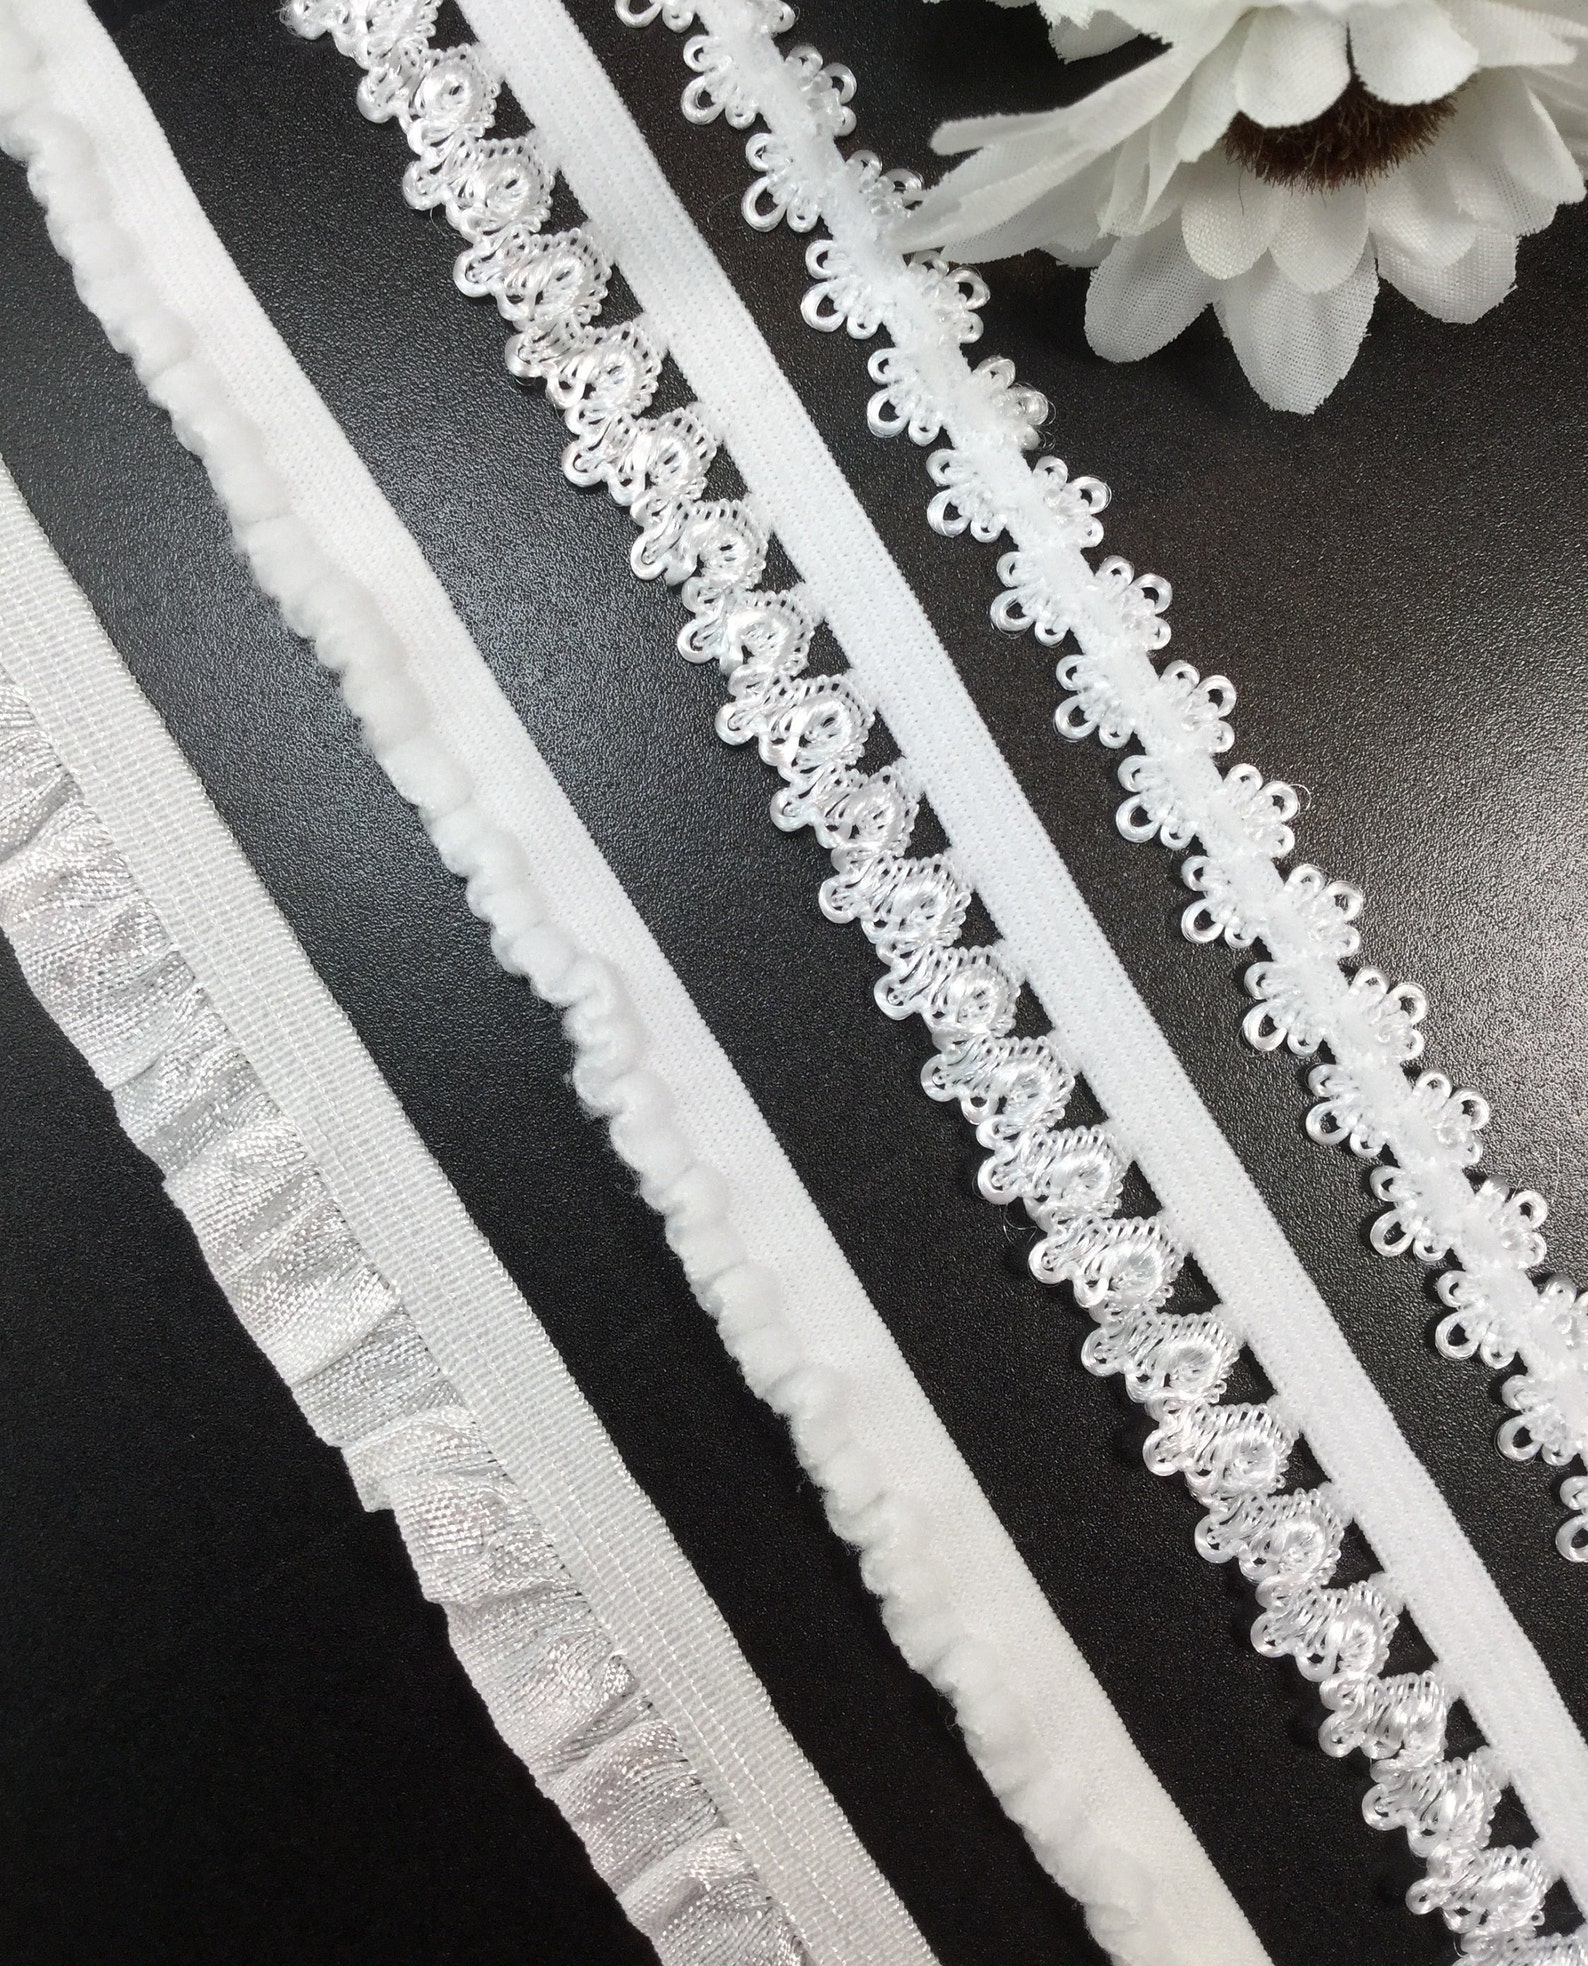 White Stretch Lace Trim in 4 Styles by the Yard | Etsy